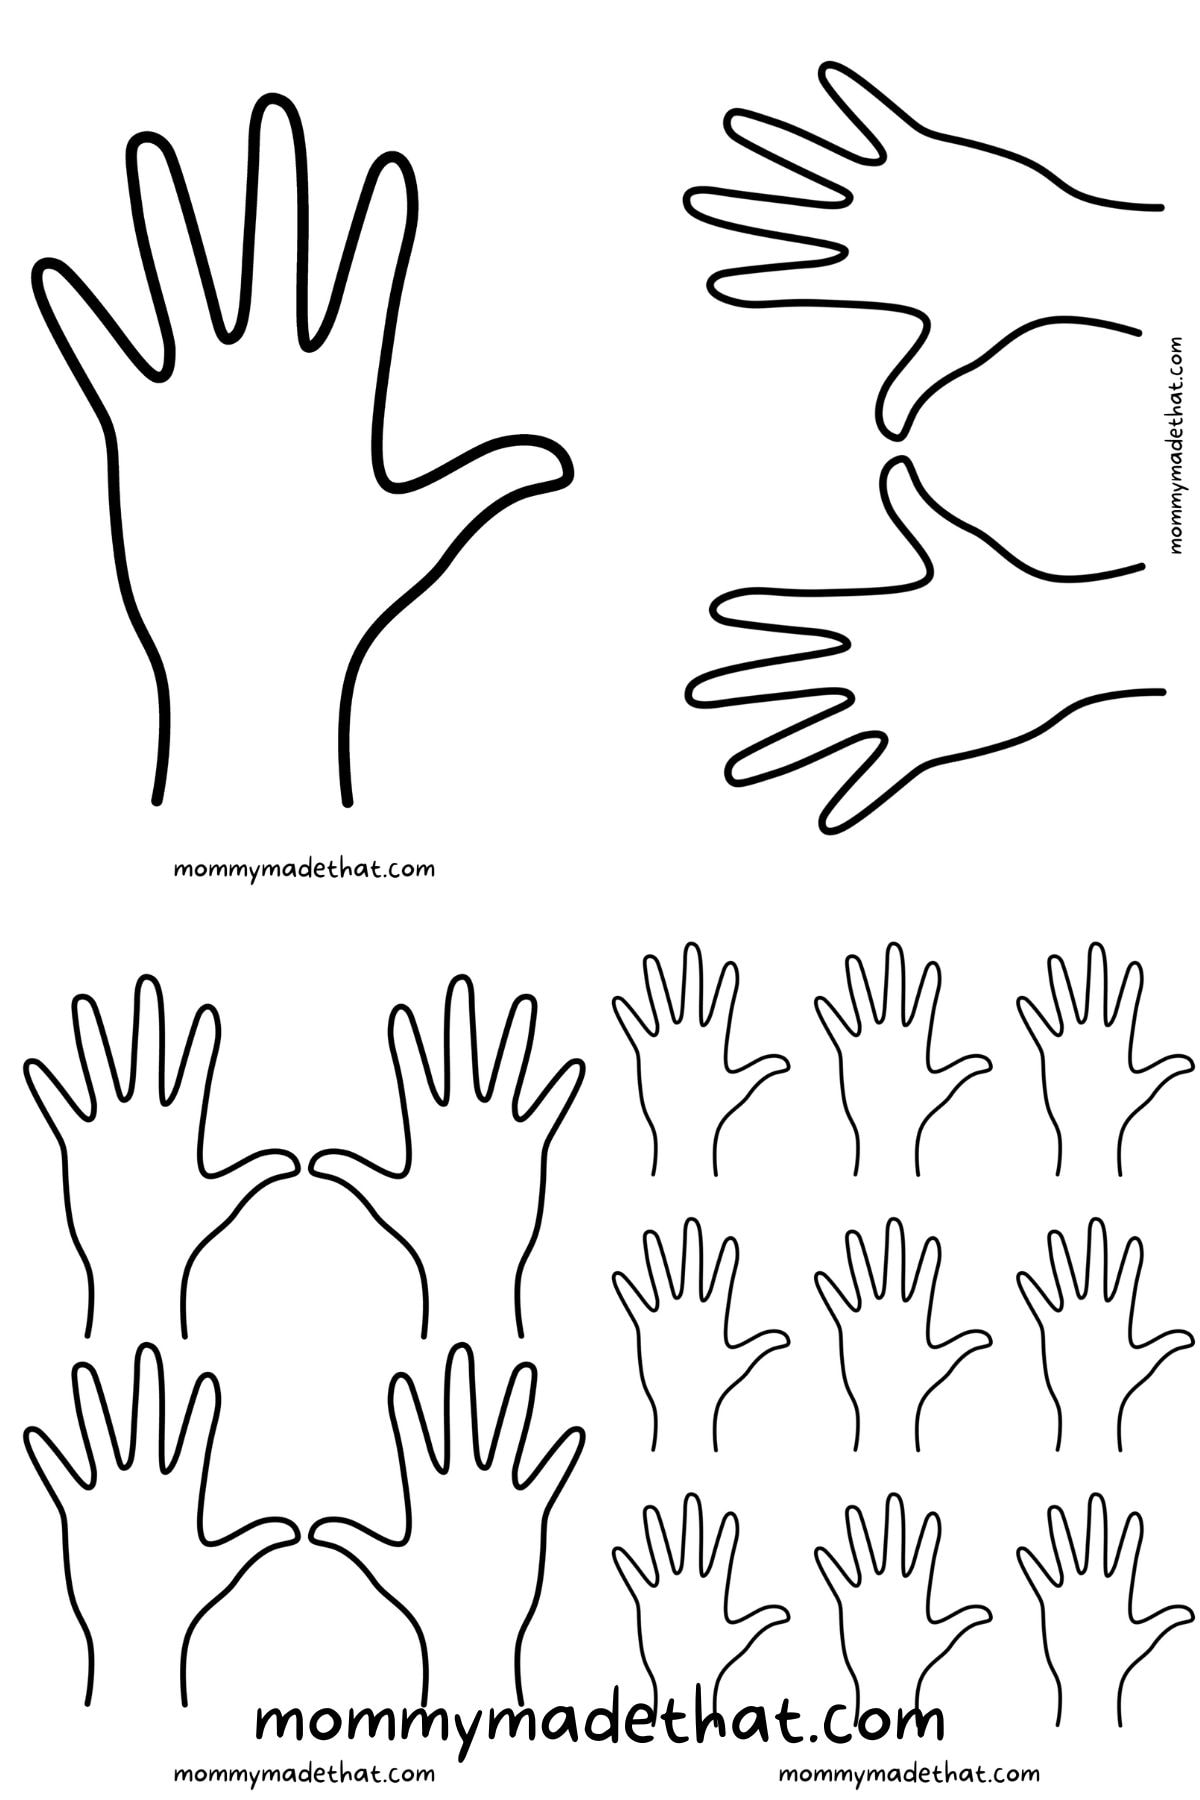 hand templates and outlines